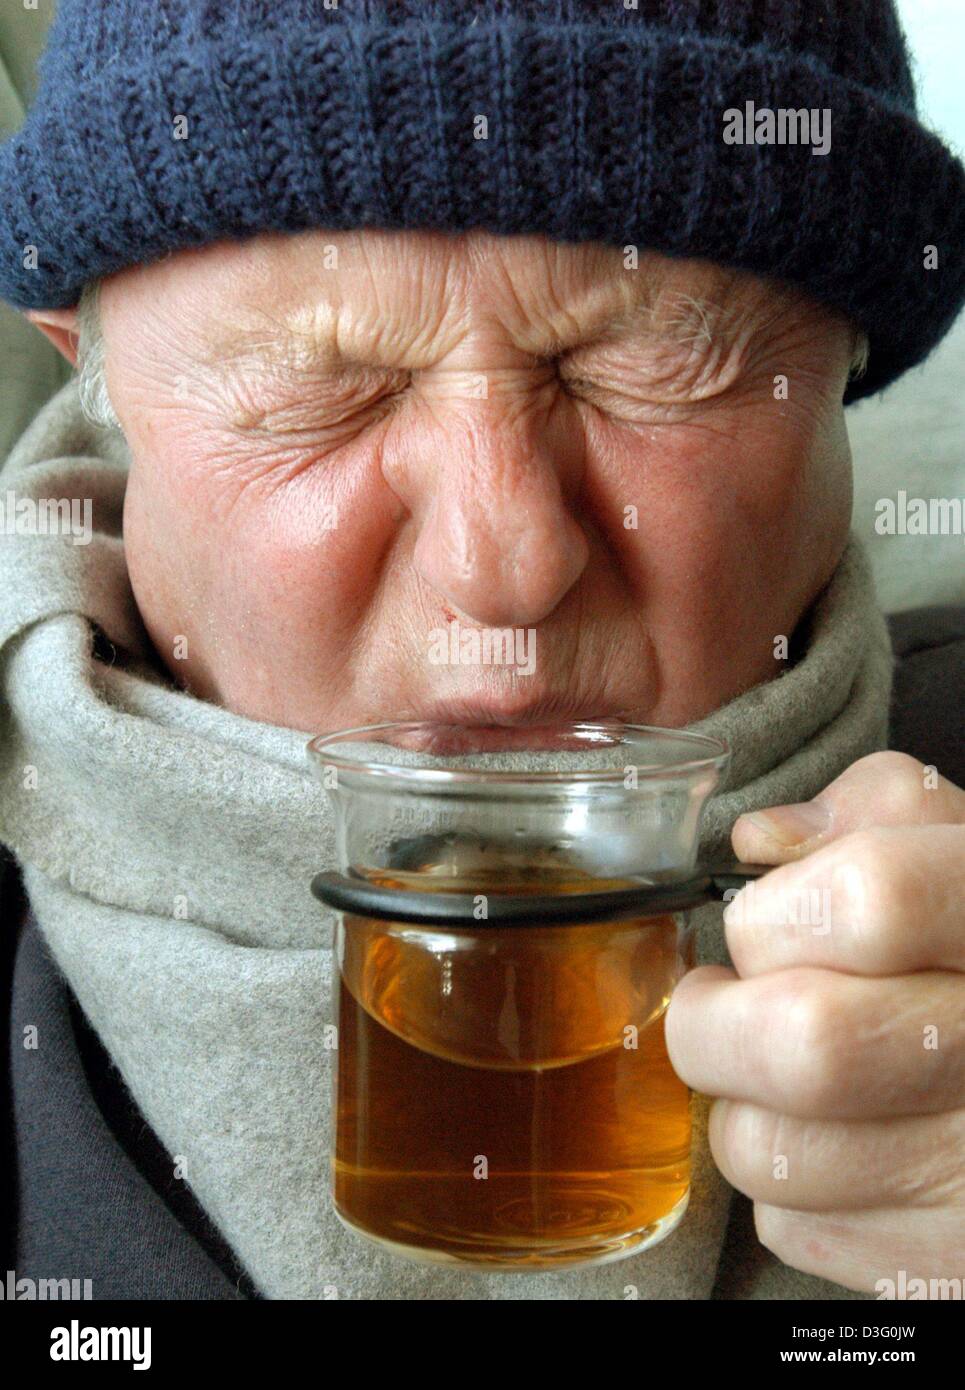 (dpa) - A man sick with the flu pulls a face as he takes a sip of herbal tea in Straubing, southern Germany, 20 February 2003.  According to medical experts, flu season should achieve its peak level in two weeks' time in Germany. Stock Photo